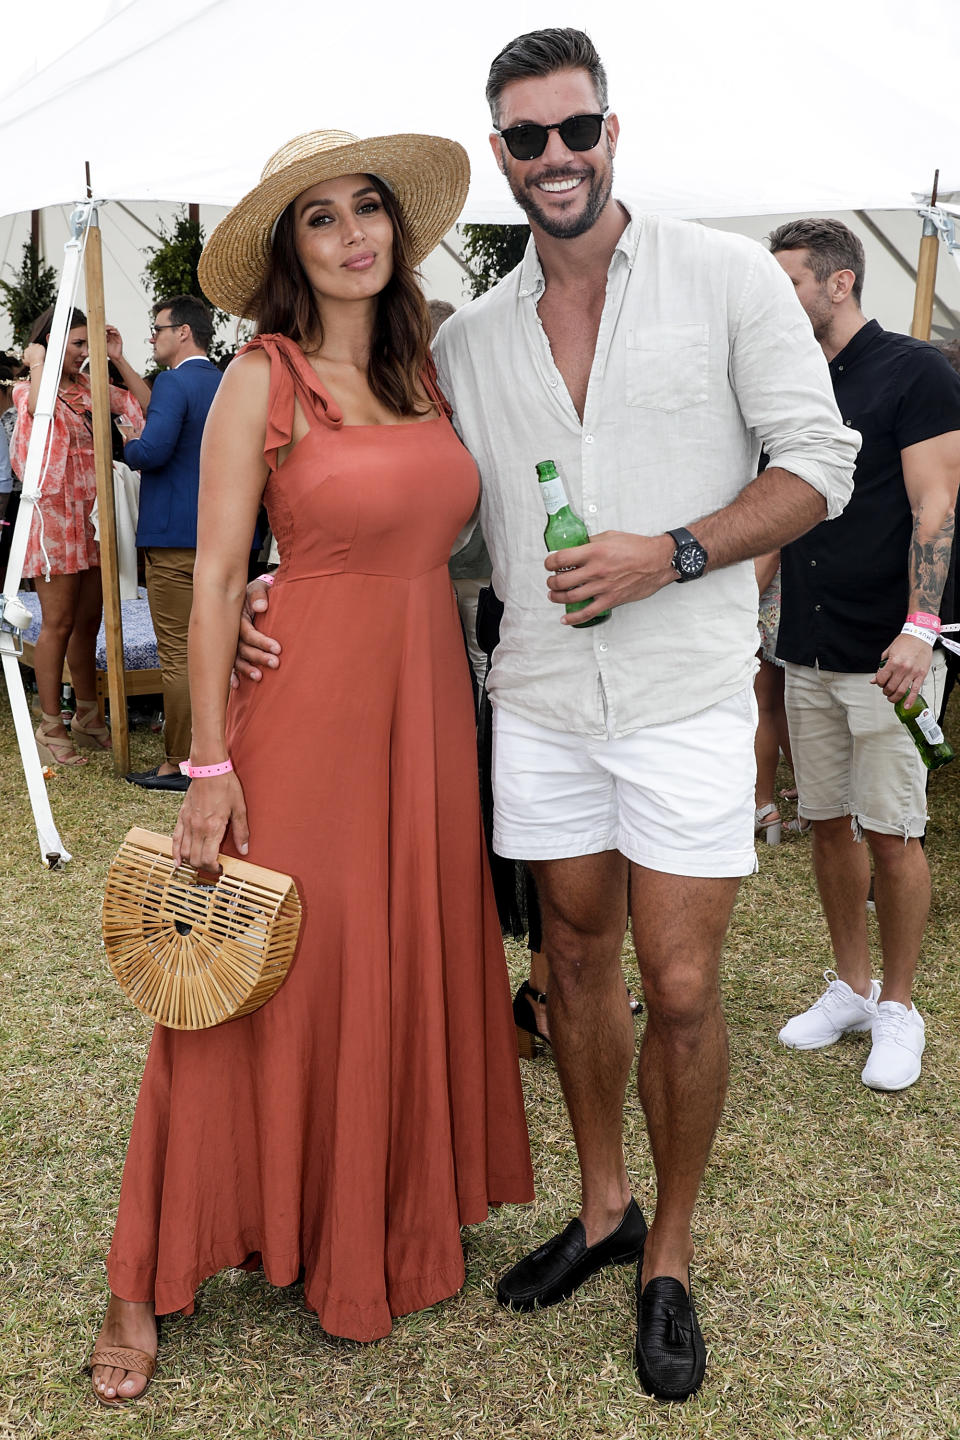 Sam and Snez are one of Australia's favourite Bachie success stories. Sam famously chose Snezana during the 2015 season of the hit reality show. The pair became engaged later that year. They welcomed their first child together, Willow, in 2017. The pair wed in a stunning Byron Bay ceremony the next year, and welcomed a second baby girl, Charlie, in July 2019. Photo: Getty Images